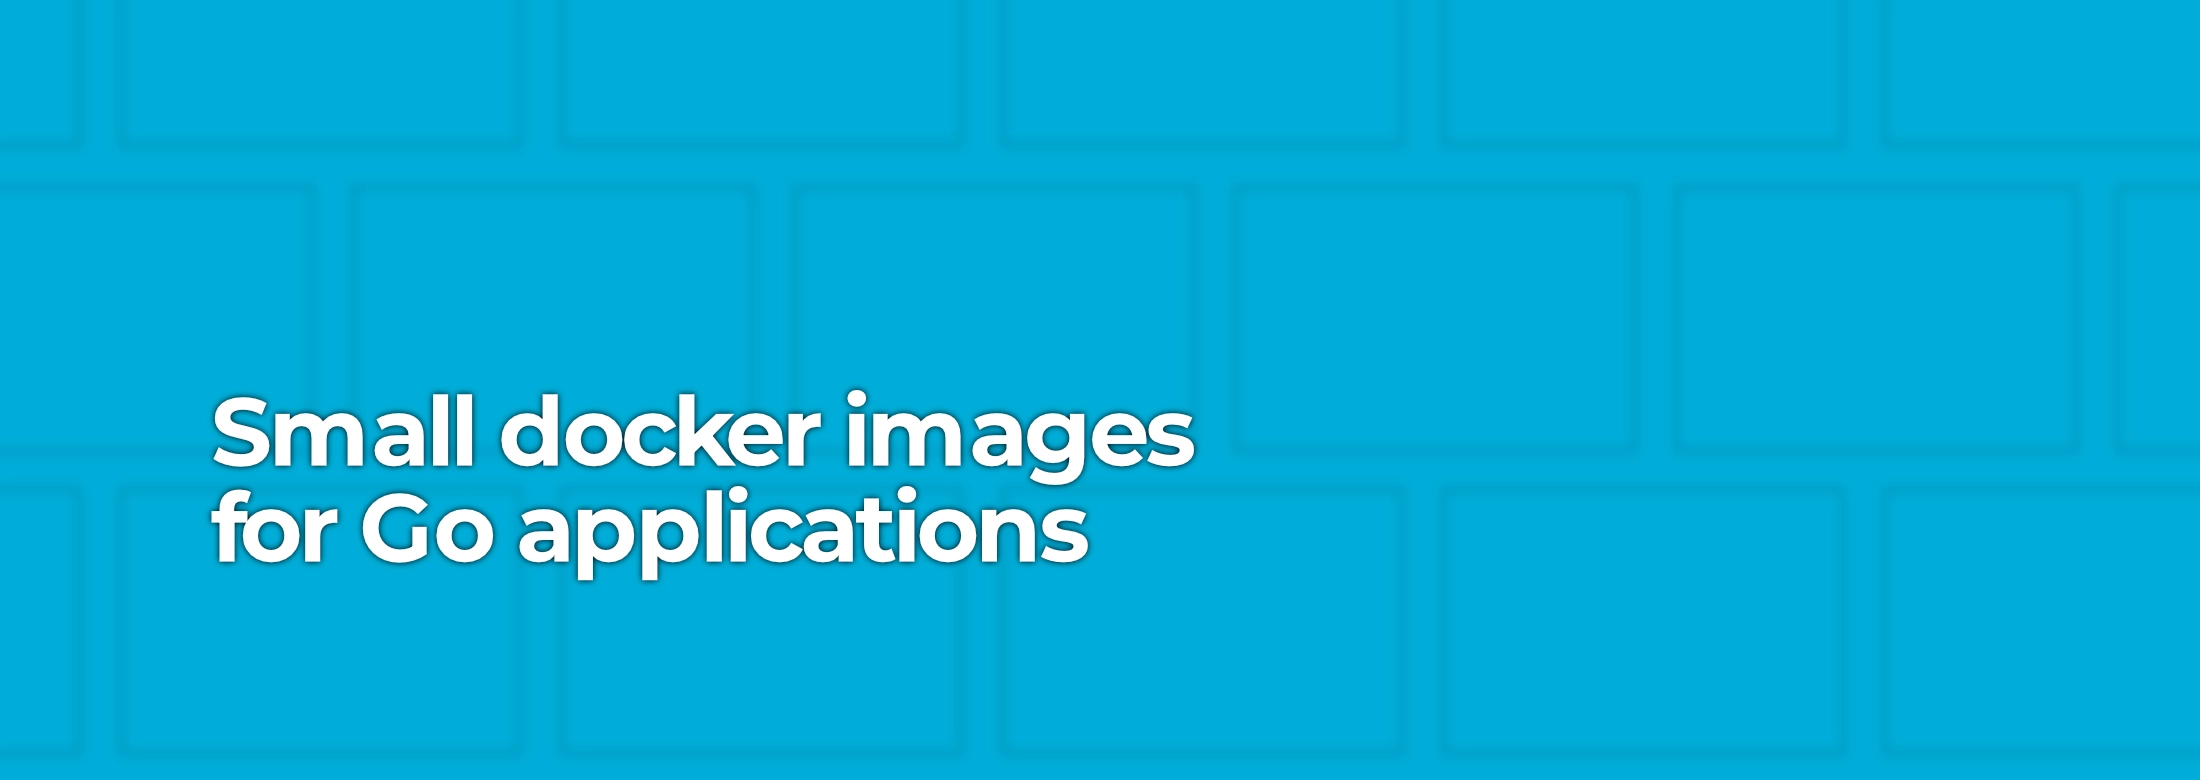 Small docker images for Go applications